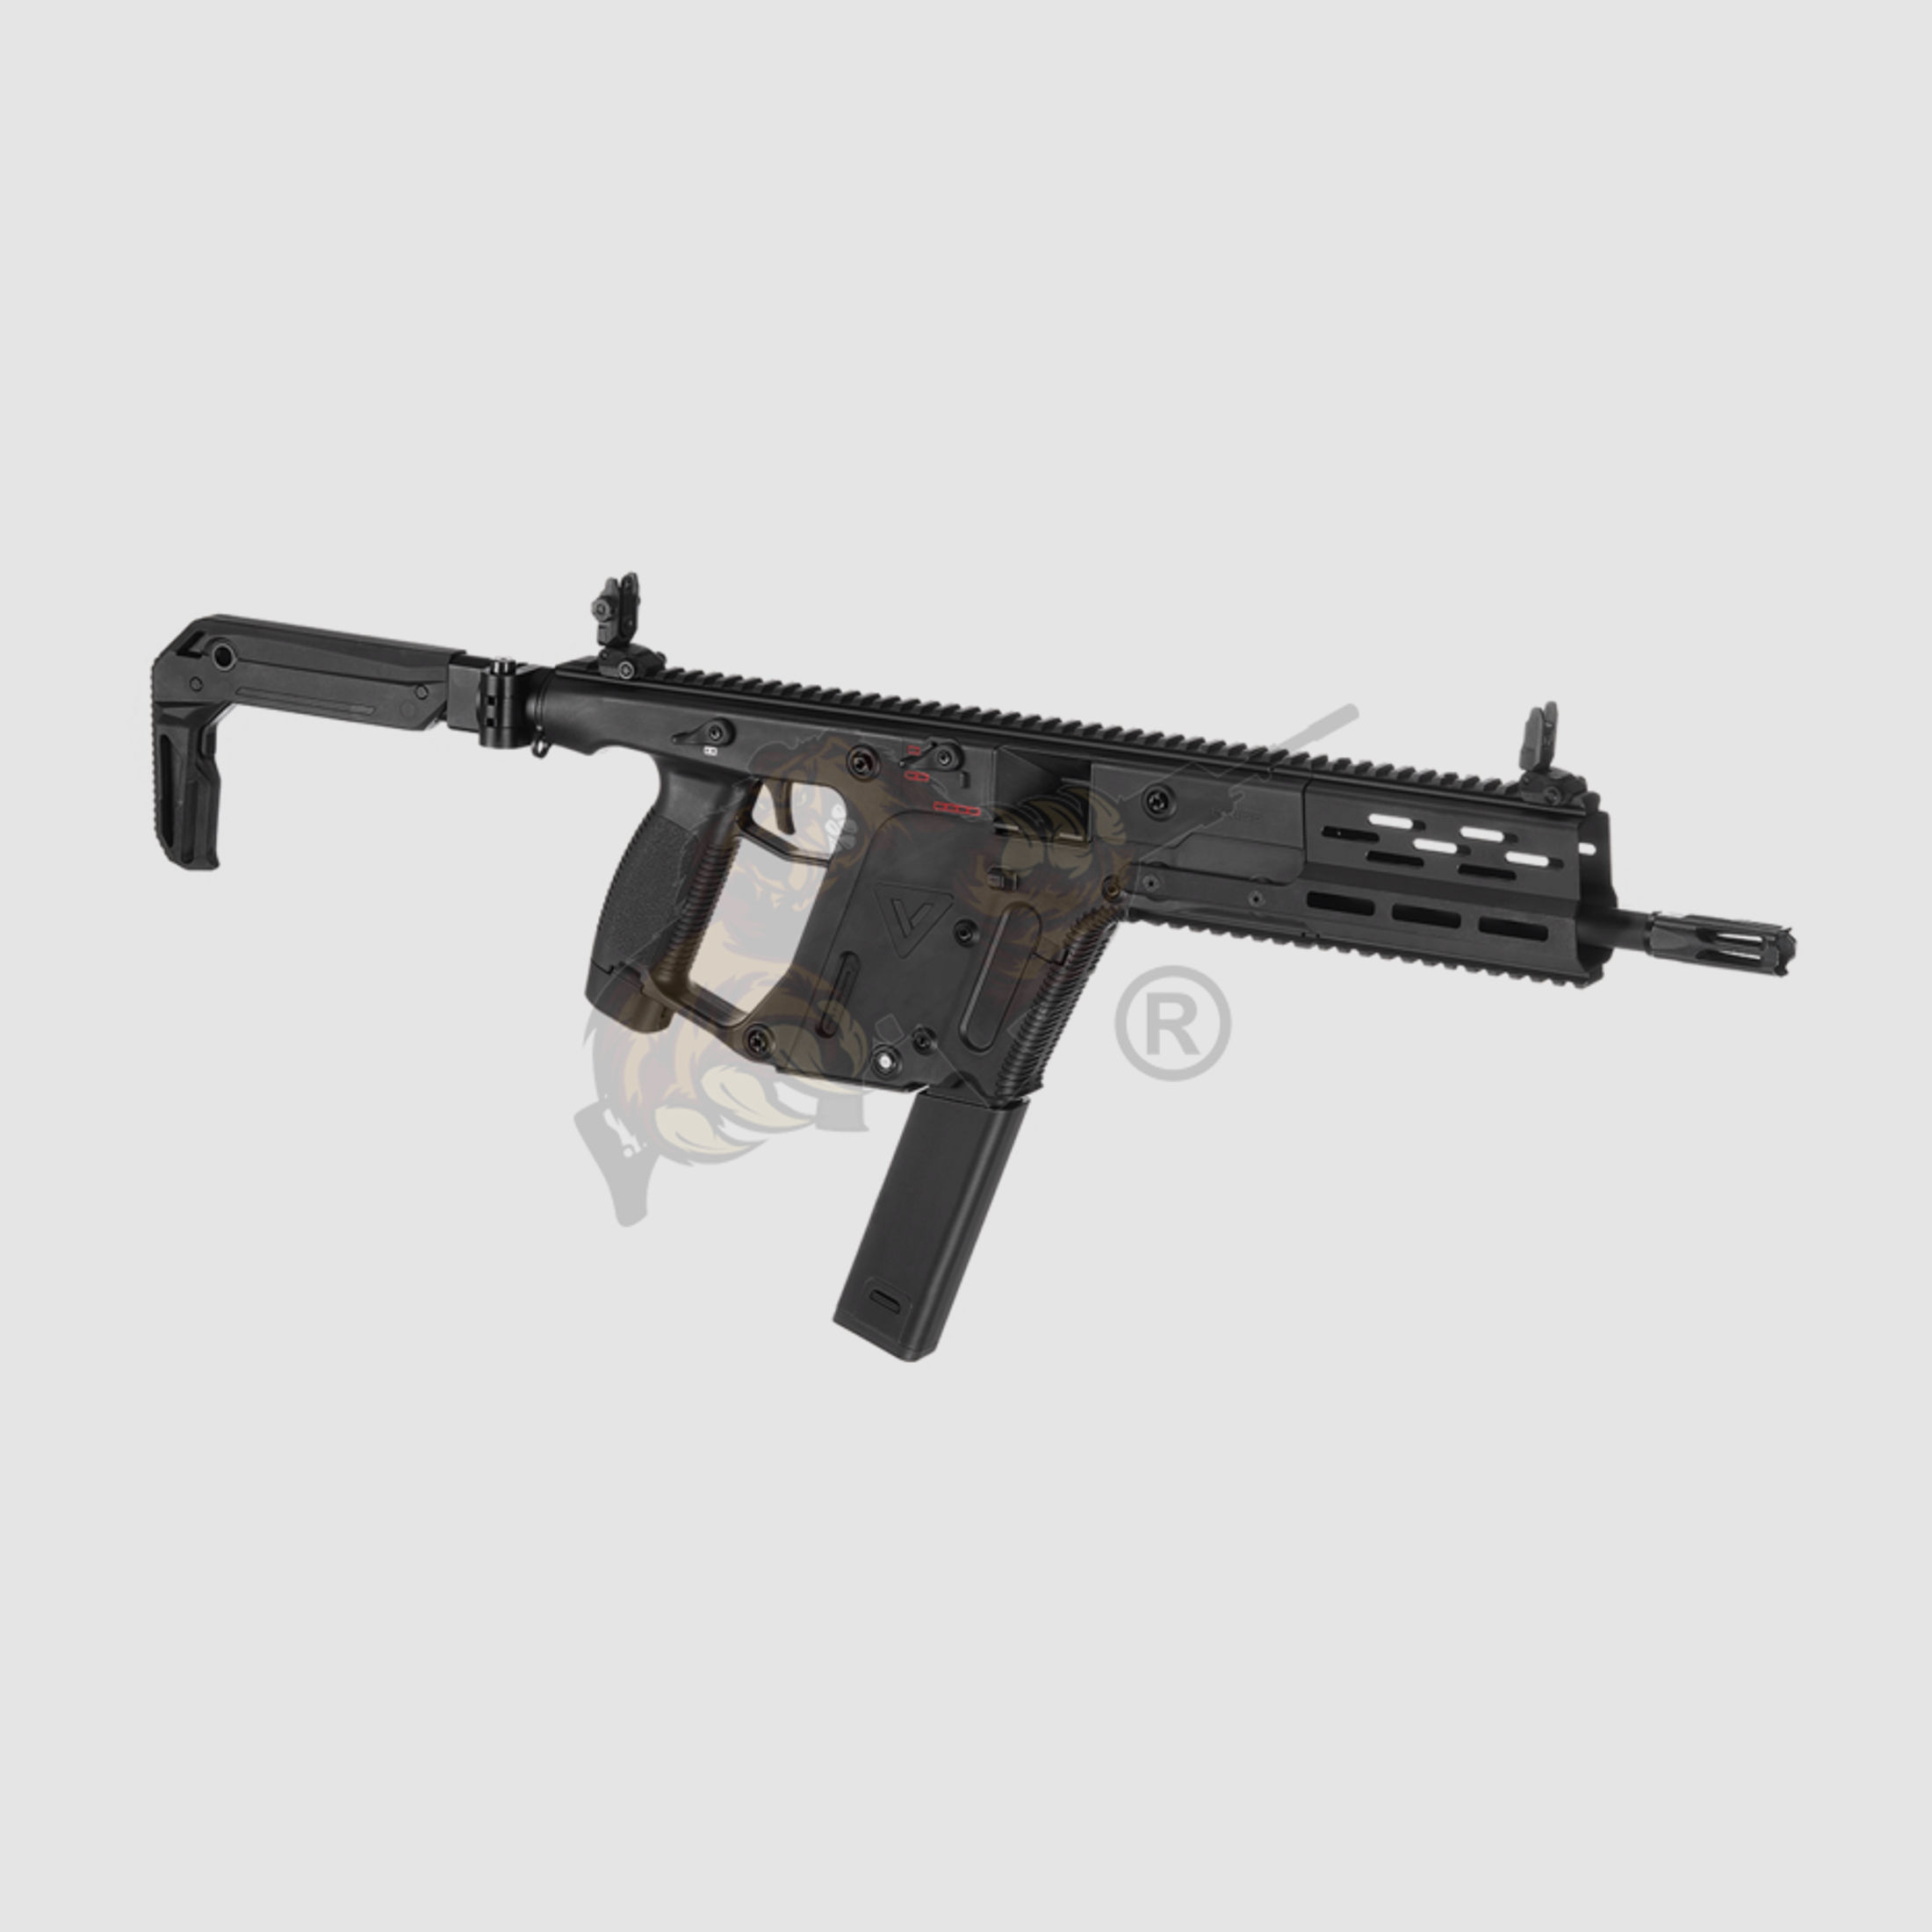 Kriss Vector Limited Edition Airsoft in Schwarz - max. 0,5 Joule (Krytac)